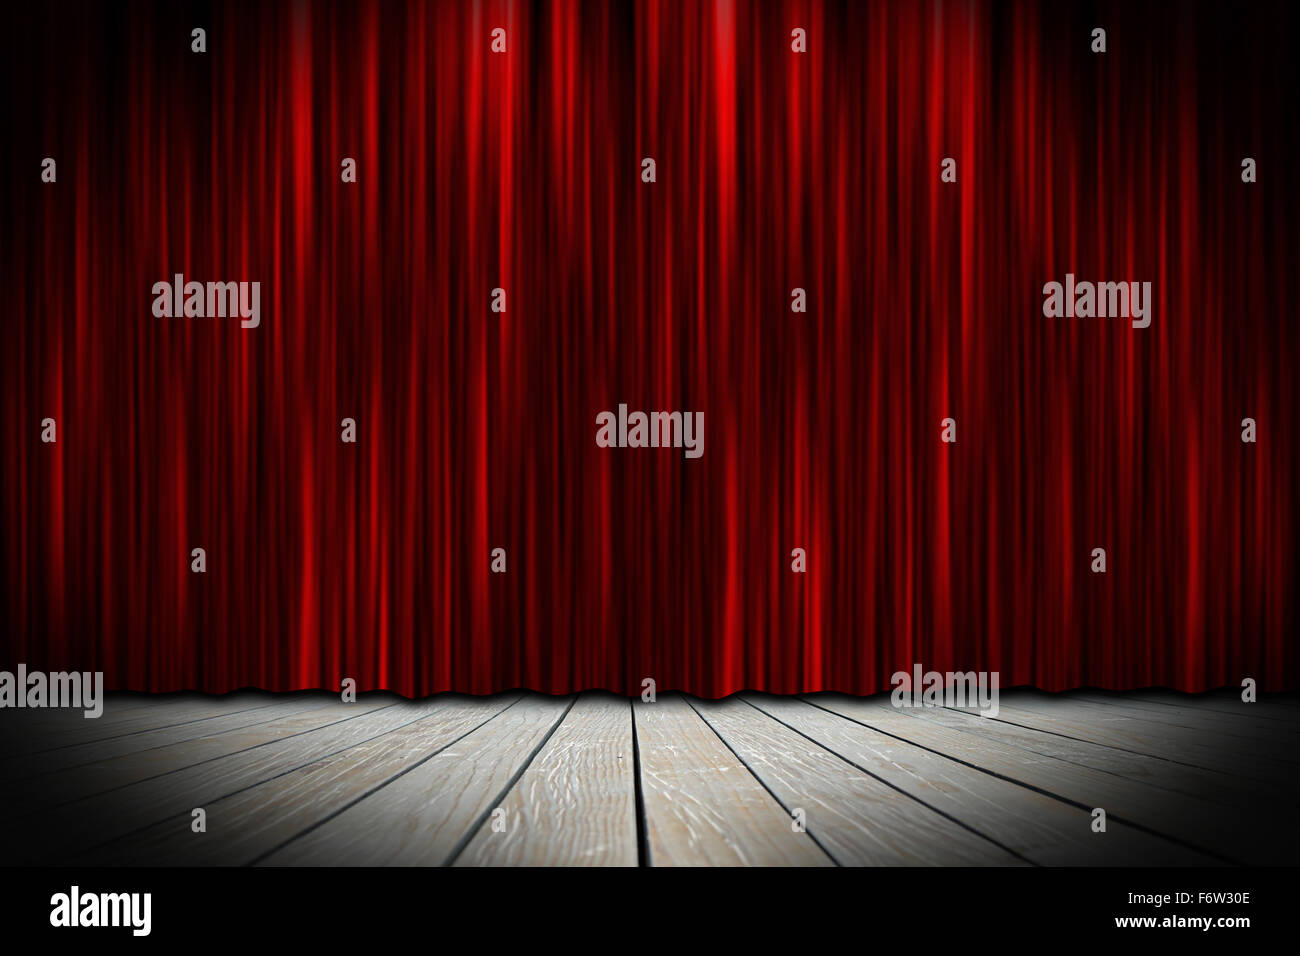 wooden theater stage with red curtains Stock Photo